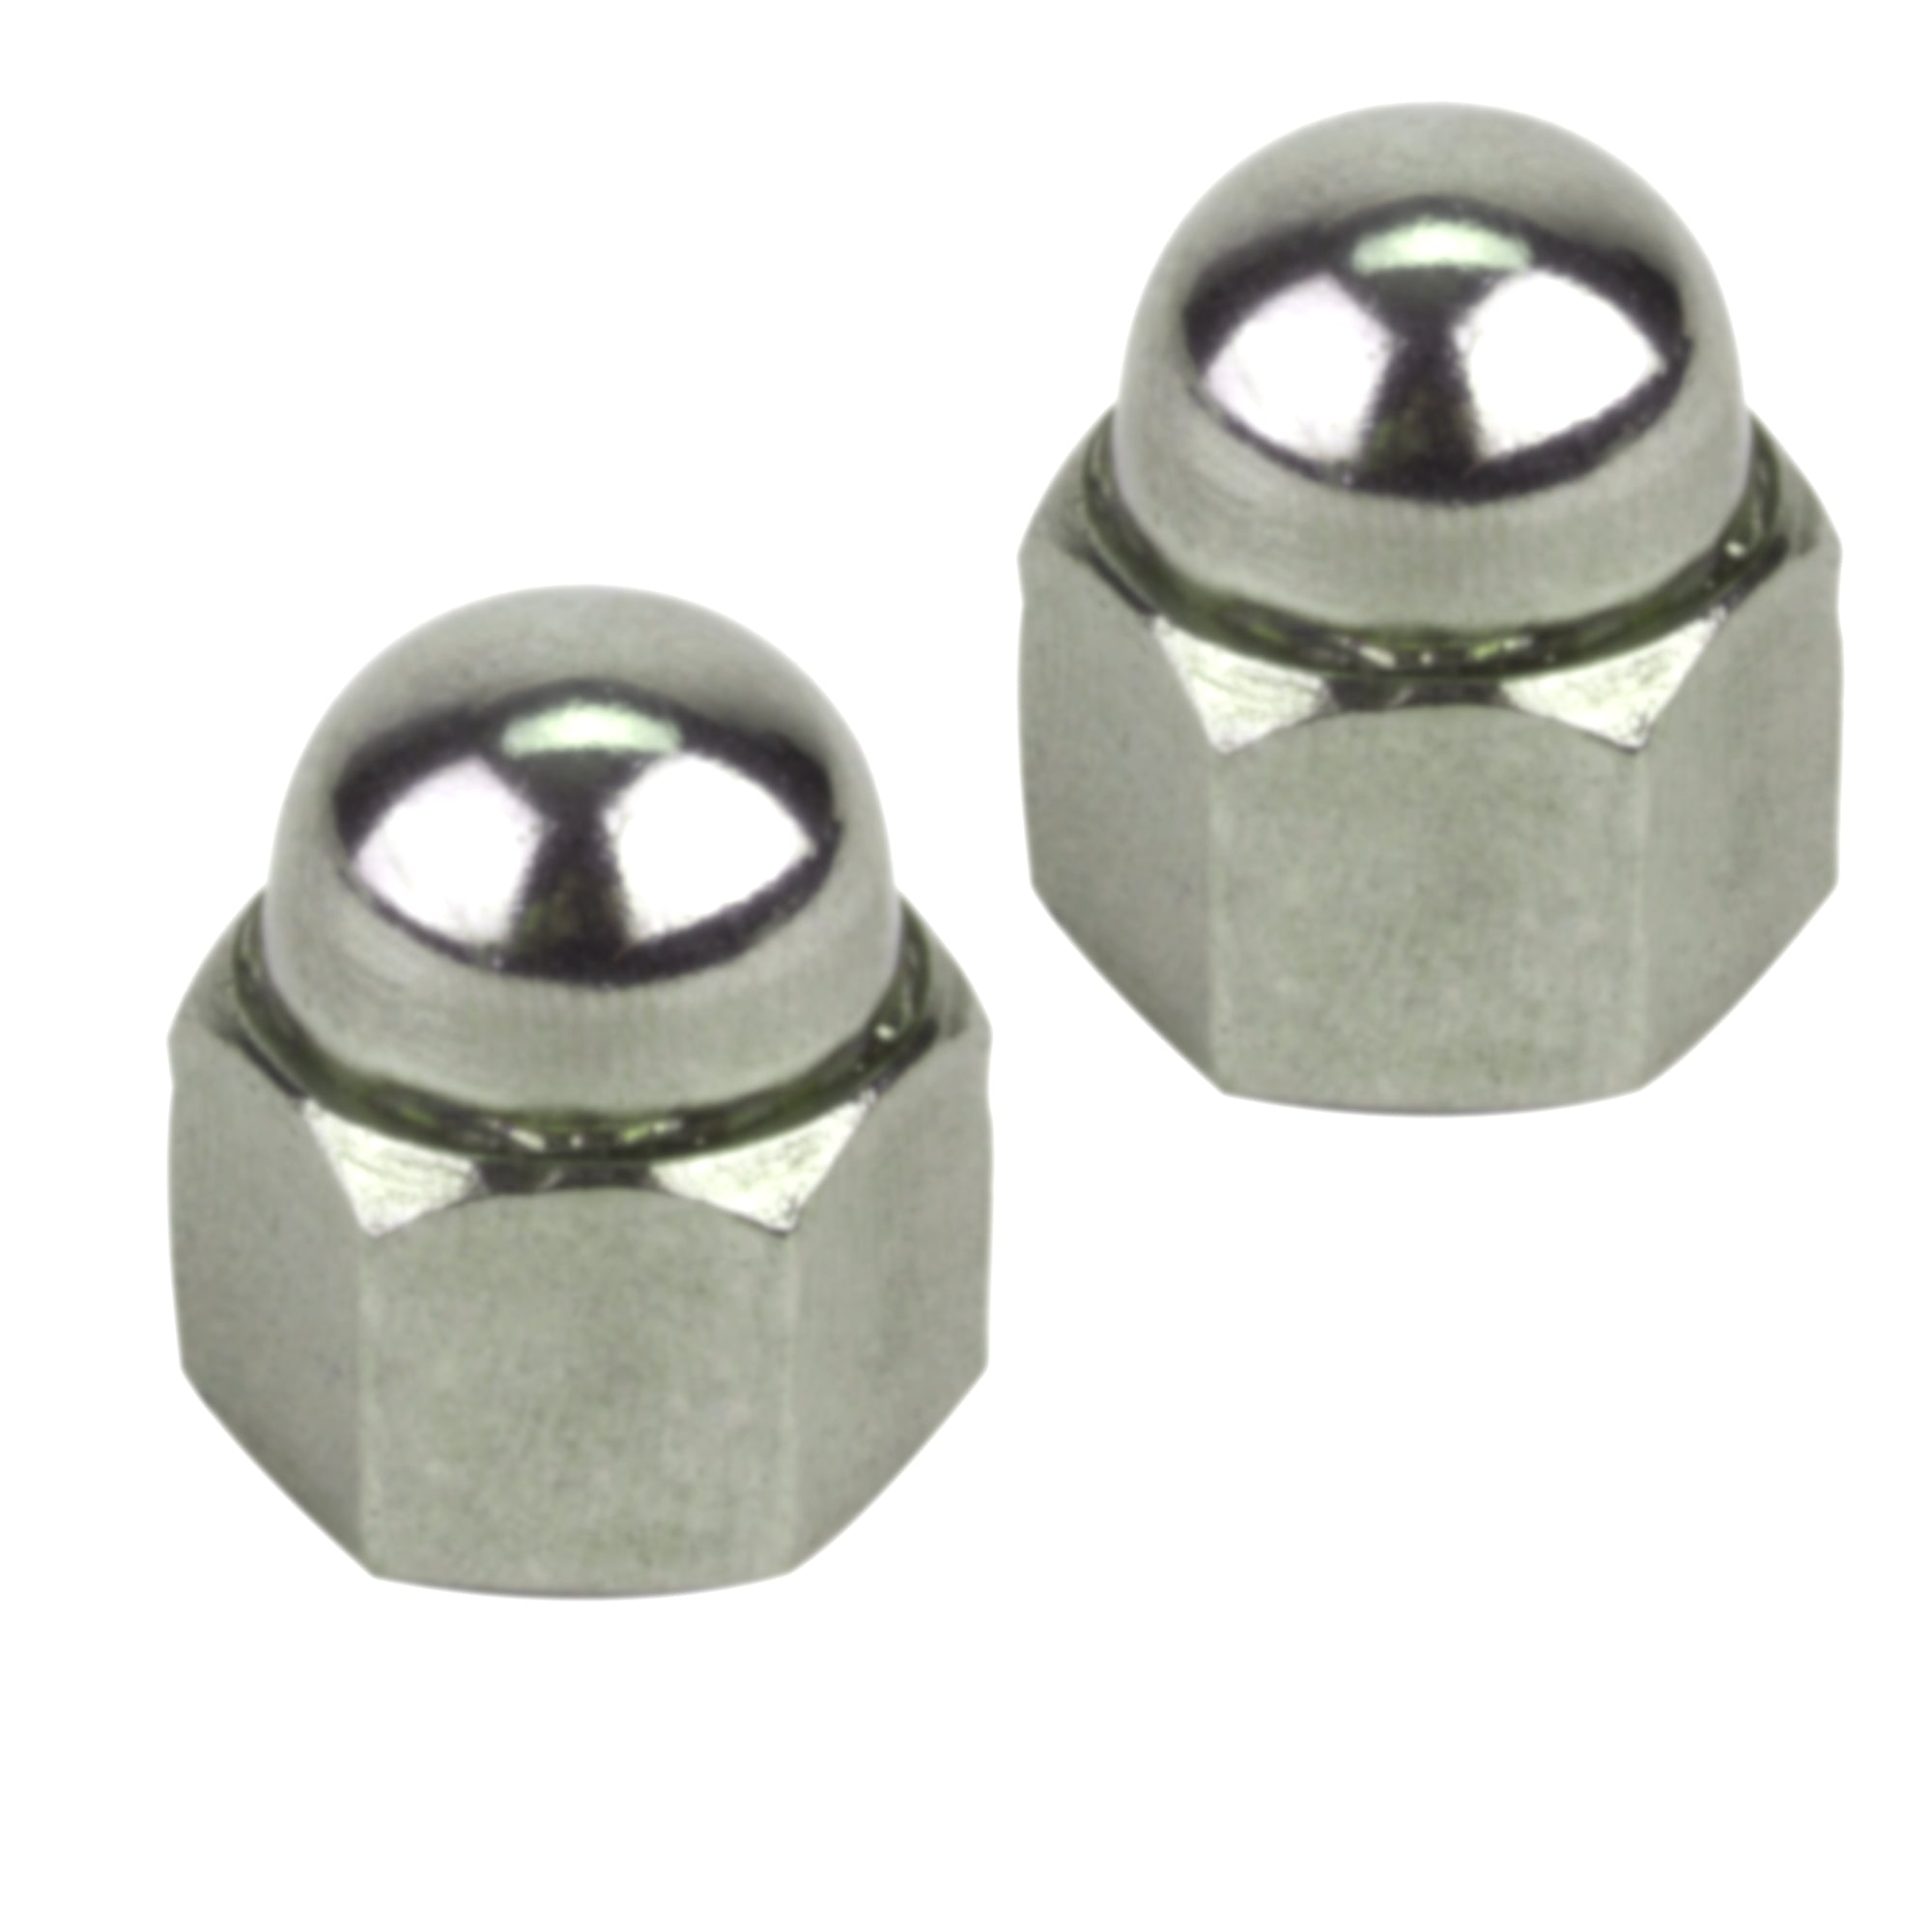 Chrome Plated Acorn Axle Nuts 3/8" x 26t Set of 2